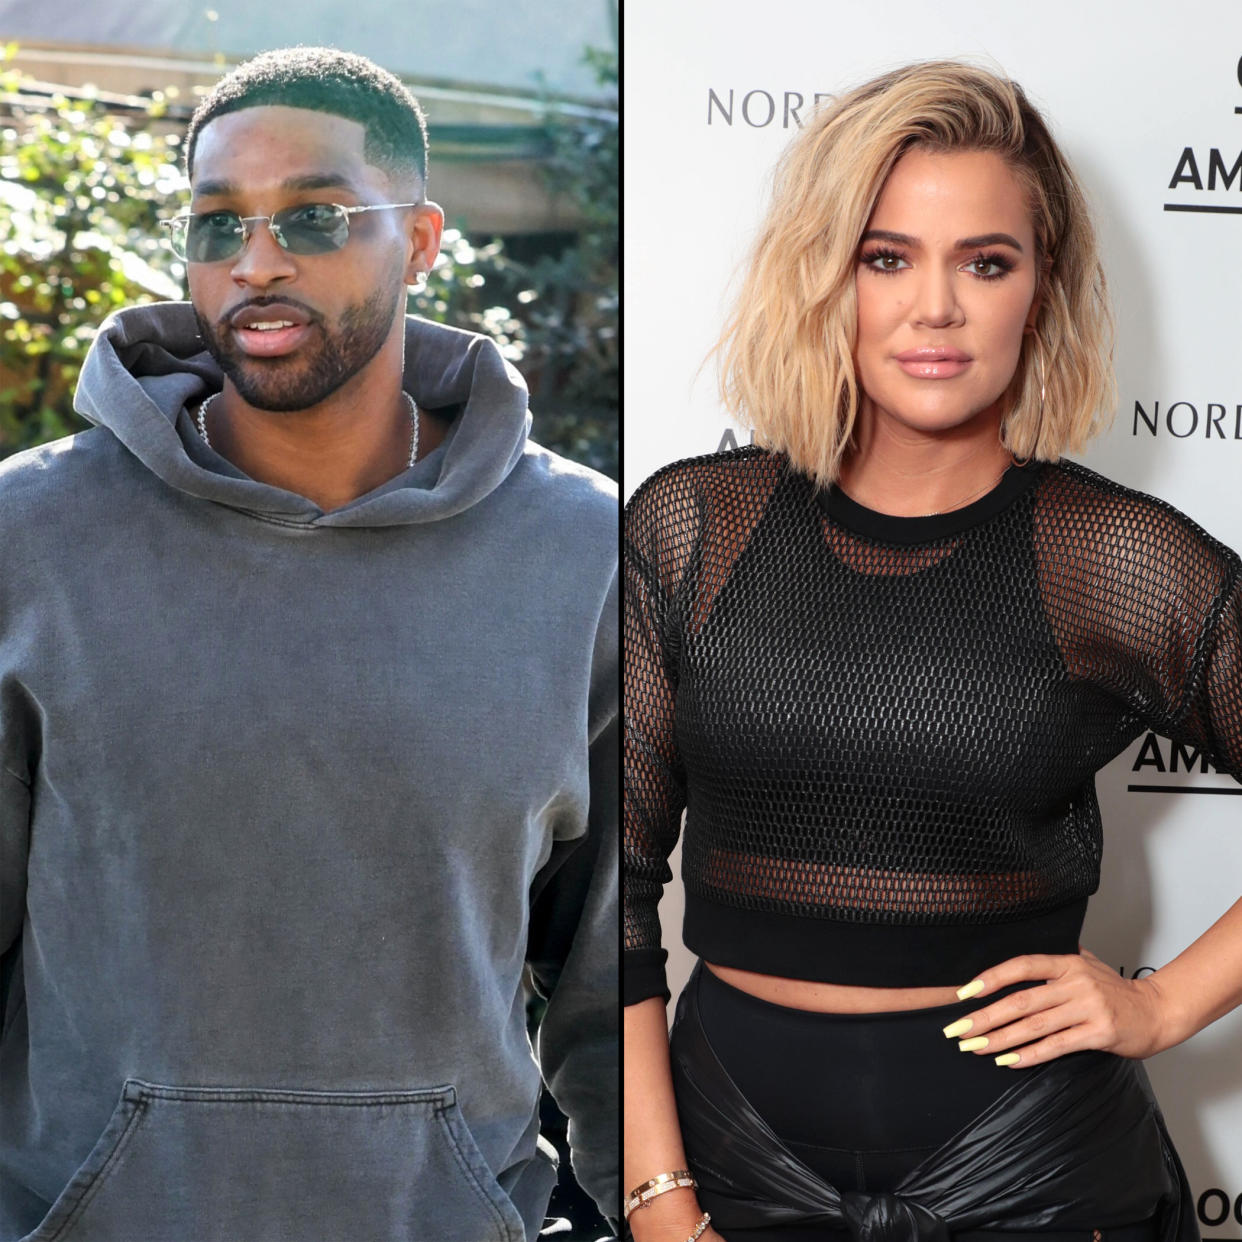 Tristan Thompson Is Happy to Be ‘So Close to Khloe Kardashian and the Kids’ After Joining Lakers